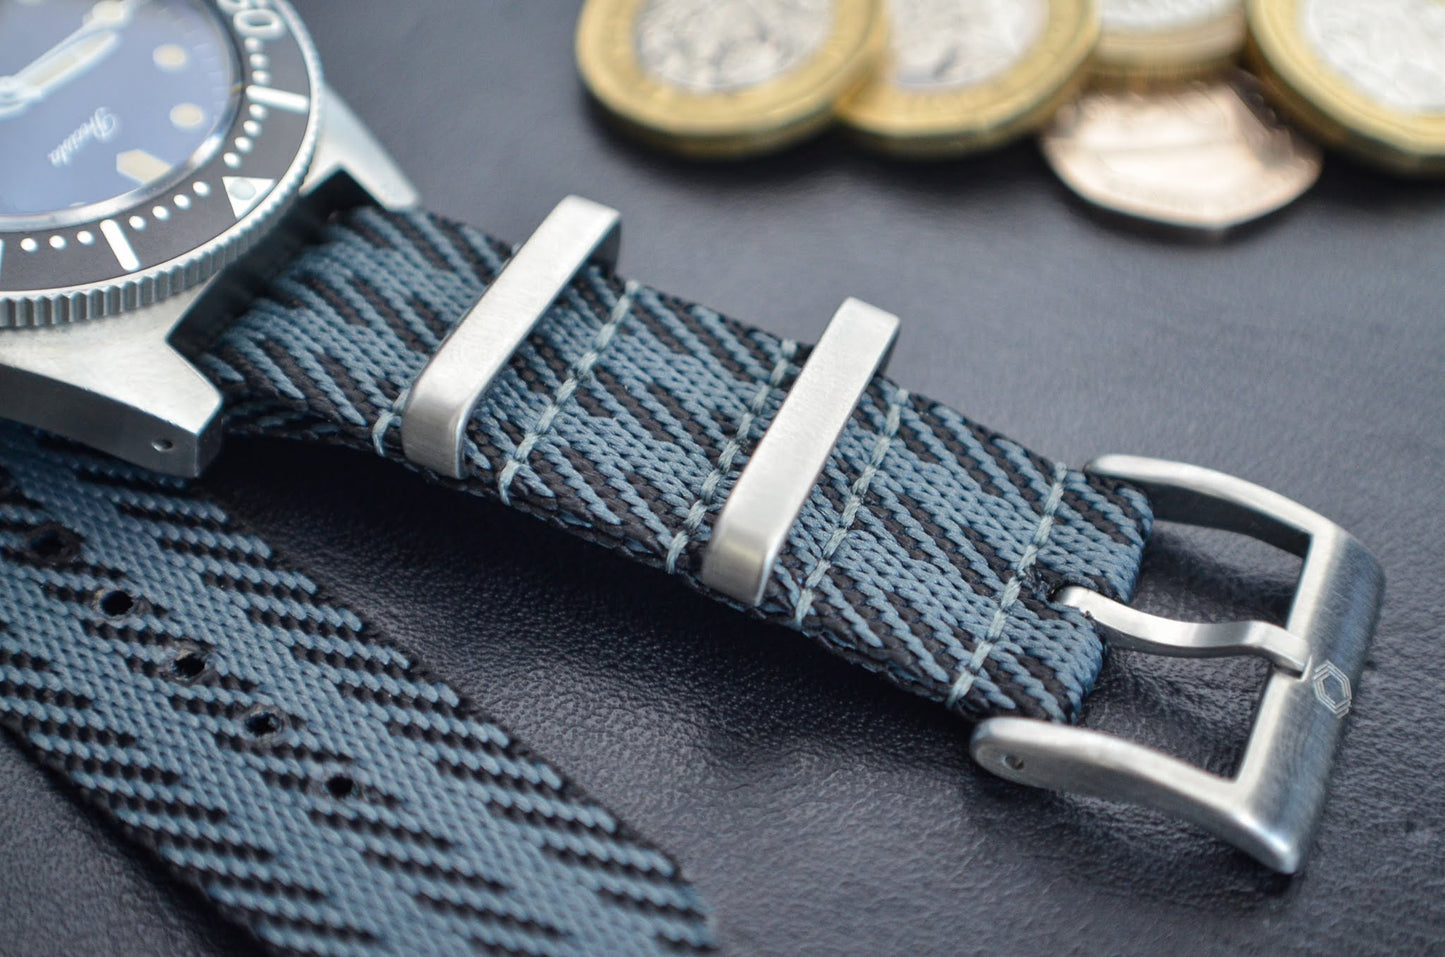 The 'Roger' - Single pass 'Bond' watch strap made of a soft weaved nylon